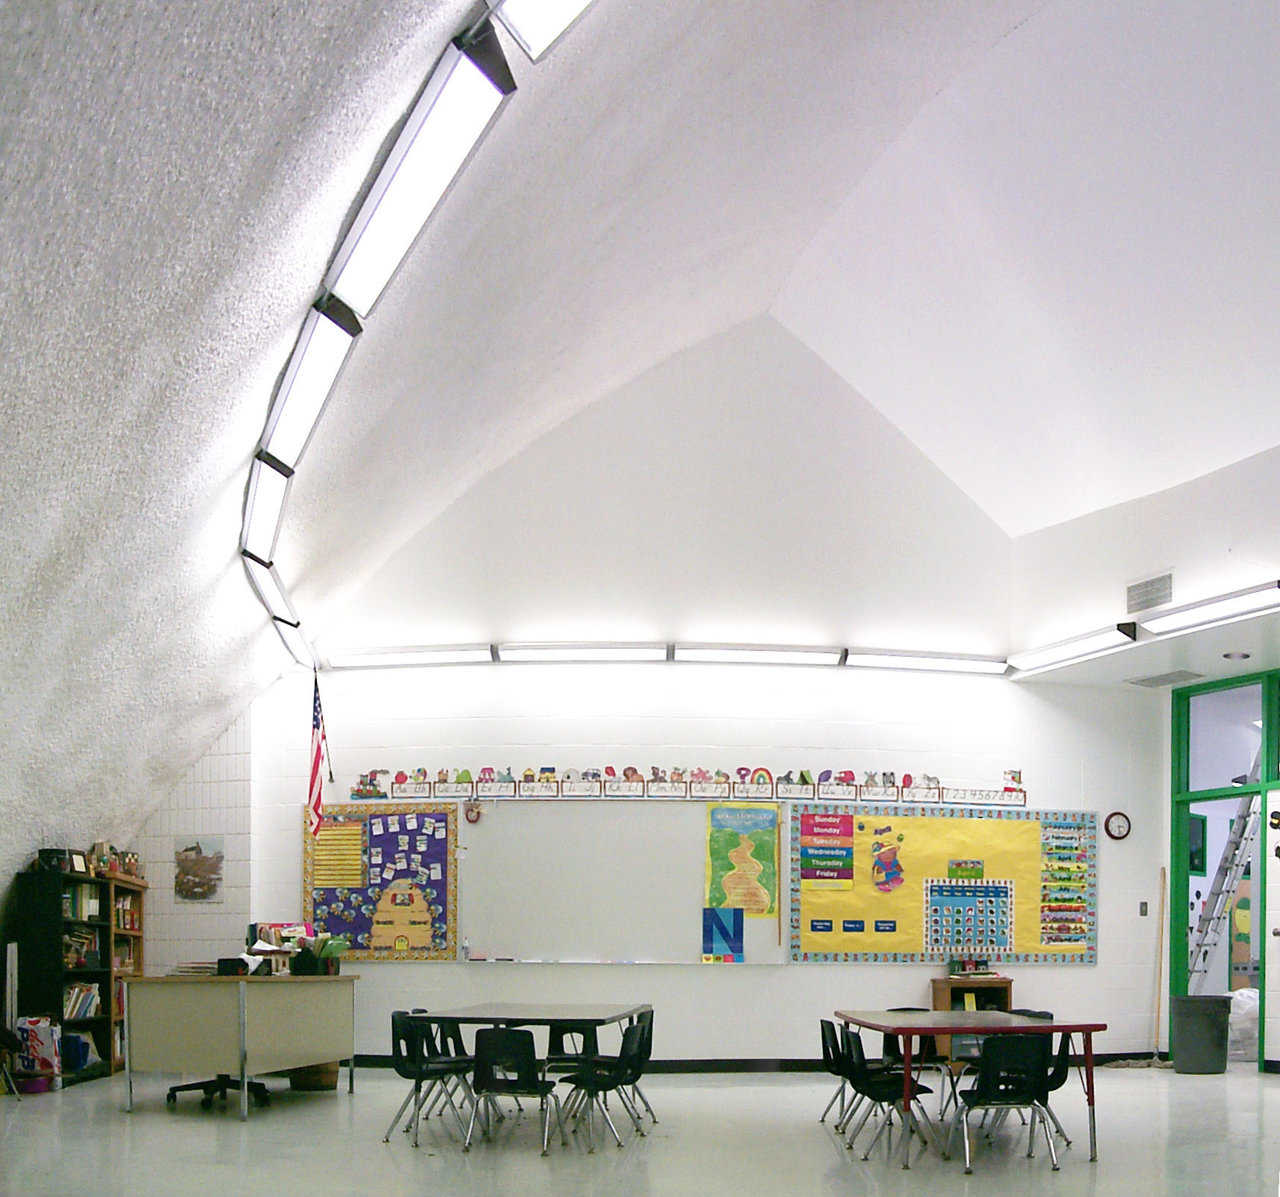 Friendly — Sufficient light and space provide a friendly learning environment for kindergartners at Pattonsburg Elementary.